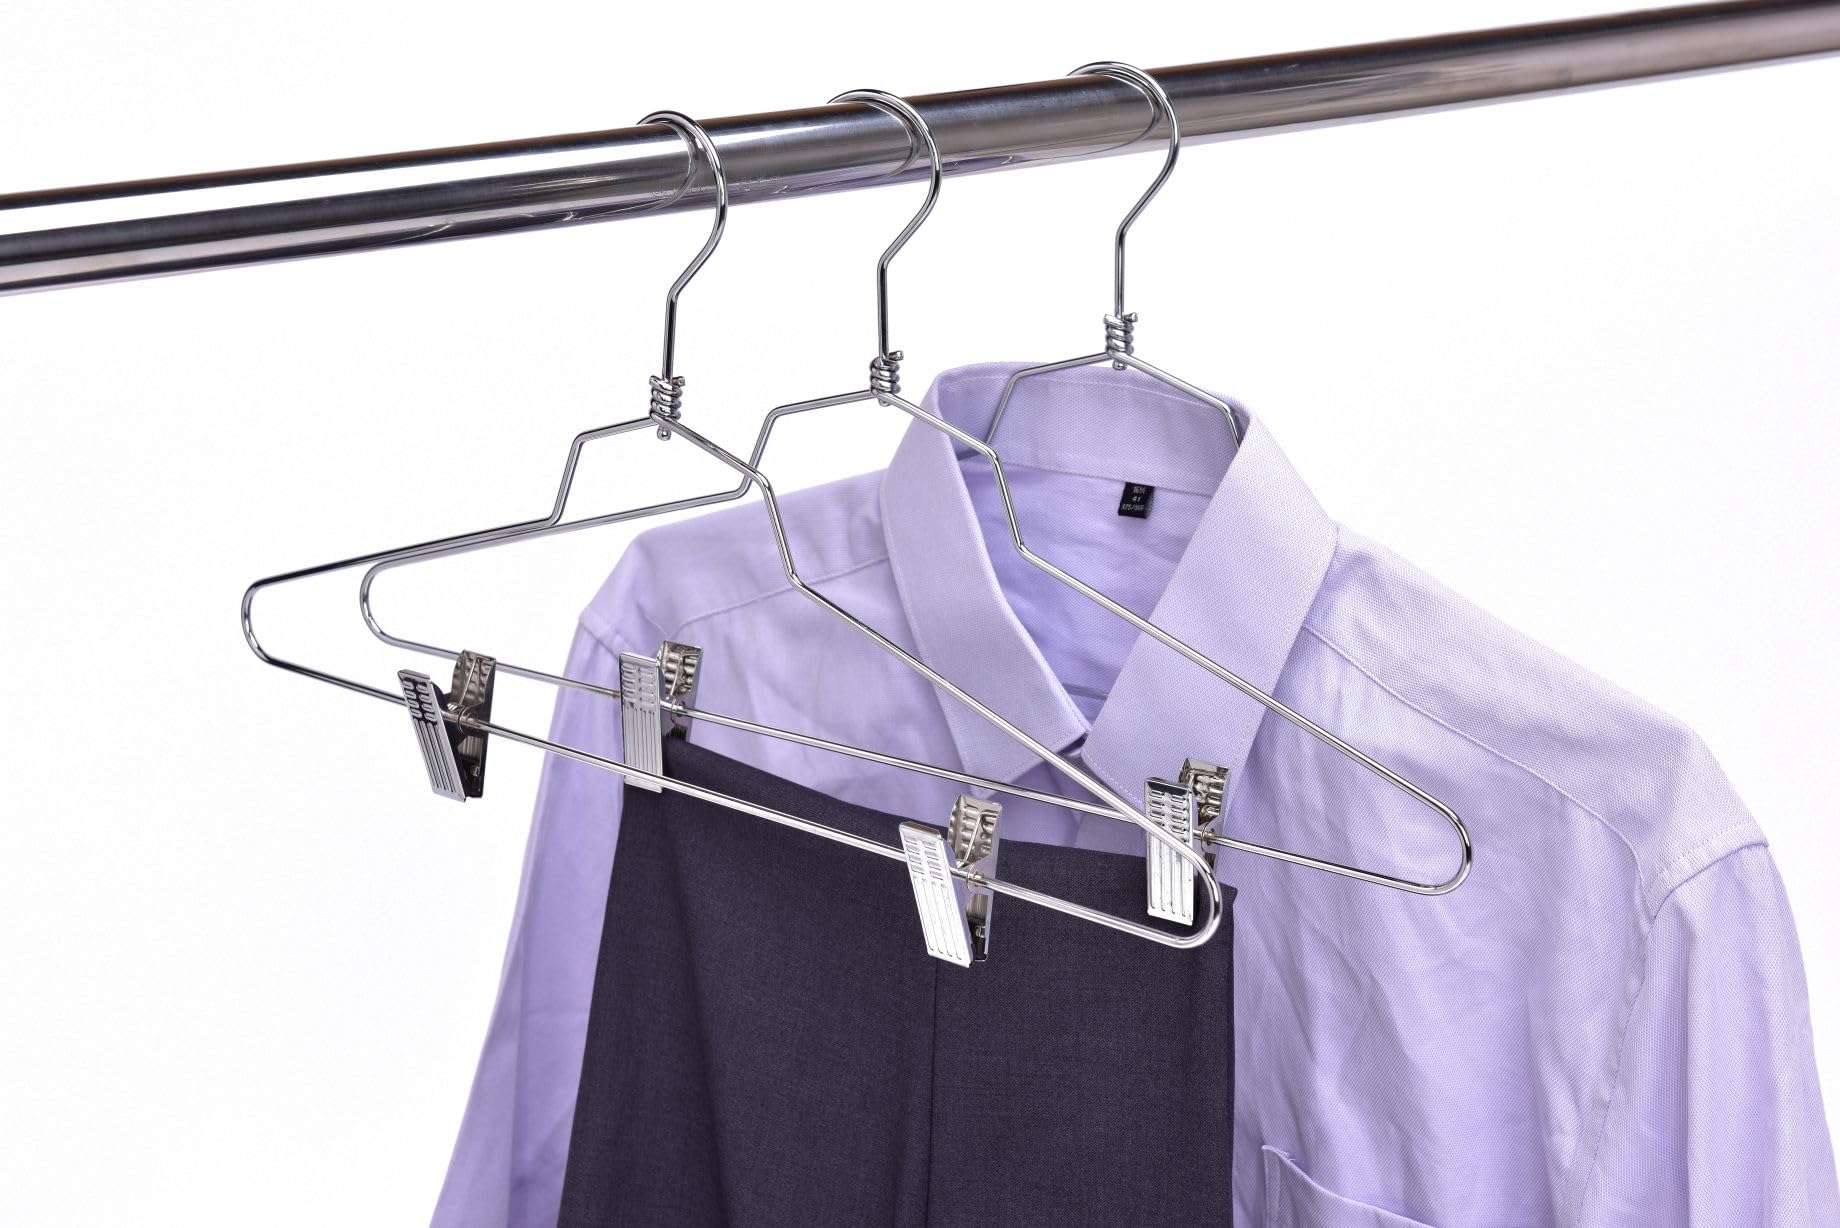 Quality Hangers Metal Skirt Hangers with Clips Multi Pack - Wire Pants Hangers with Swivel Hook - Heavy Duty Hangers for Jeans with Adjustable Metallic Clips - Ideal Clothing Hangers  - Like New